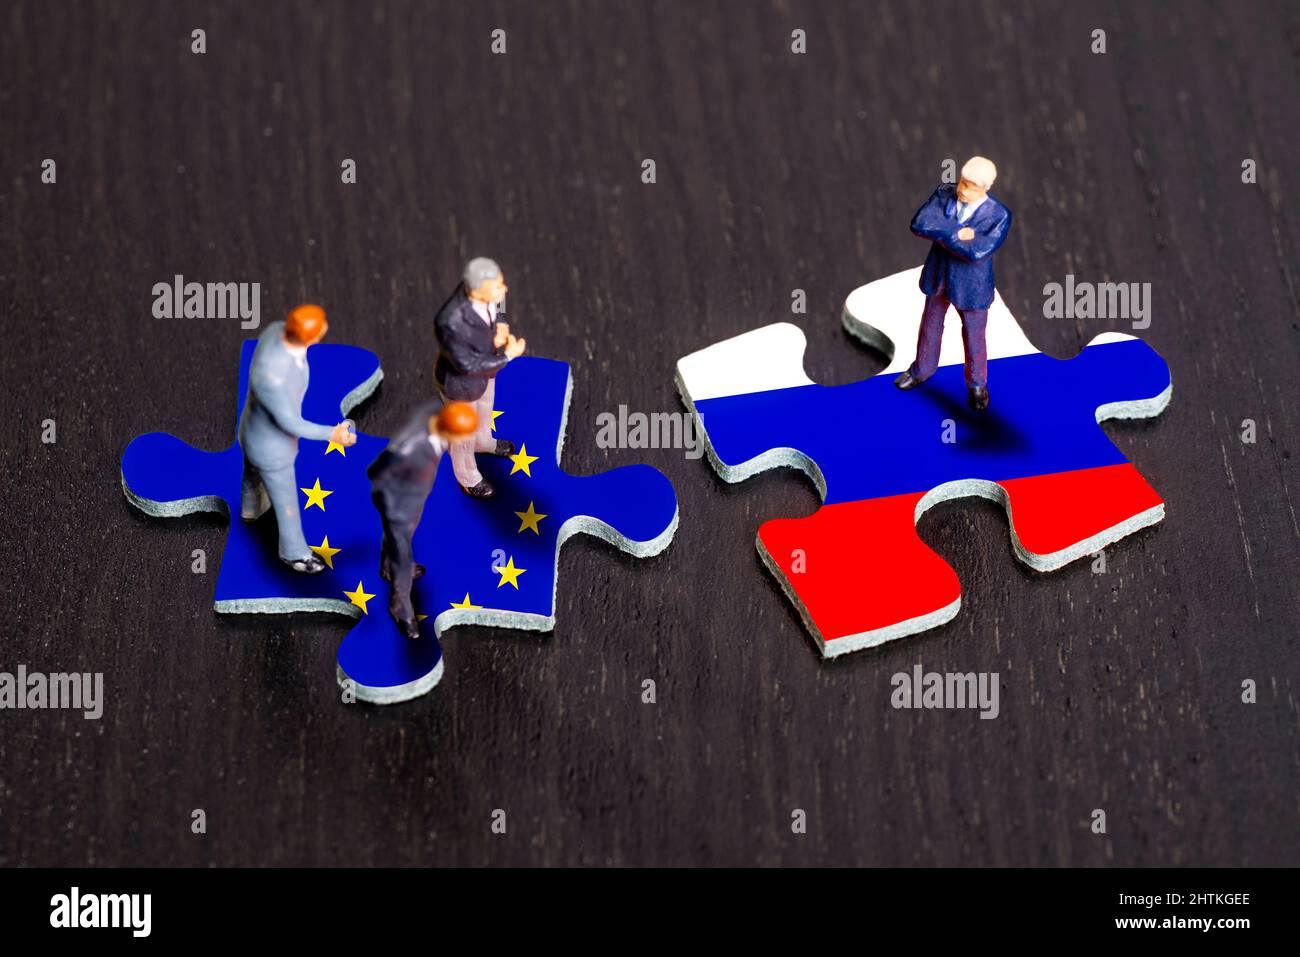 Puzzle pieces with the flags of Europe and Russia Stock Photo